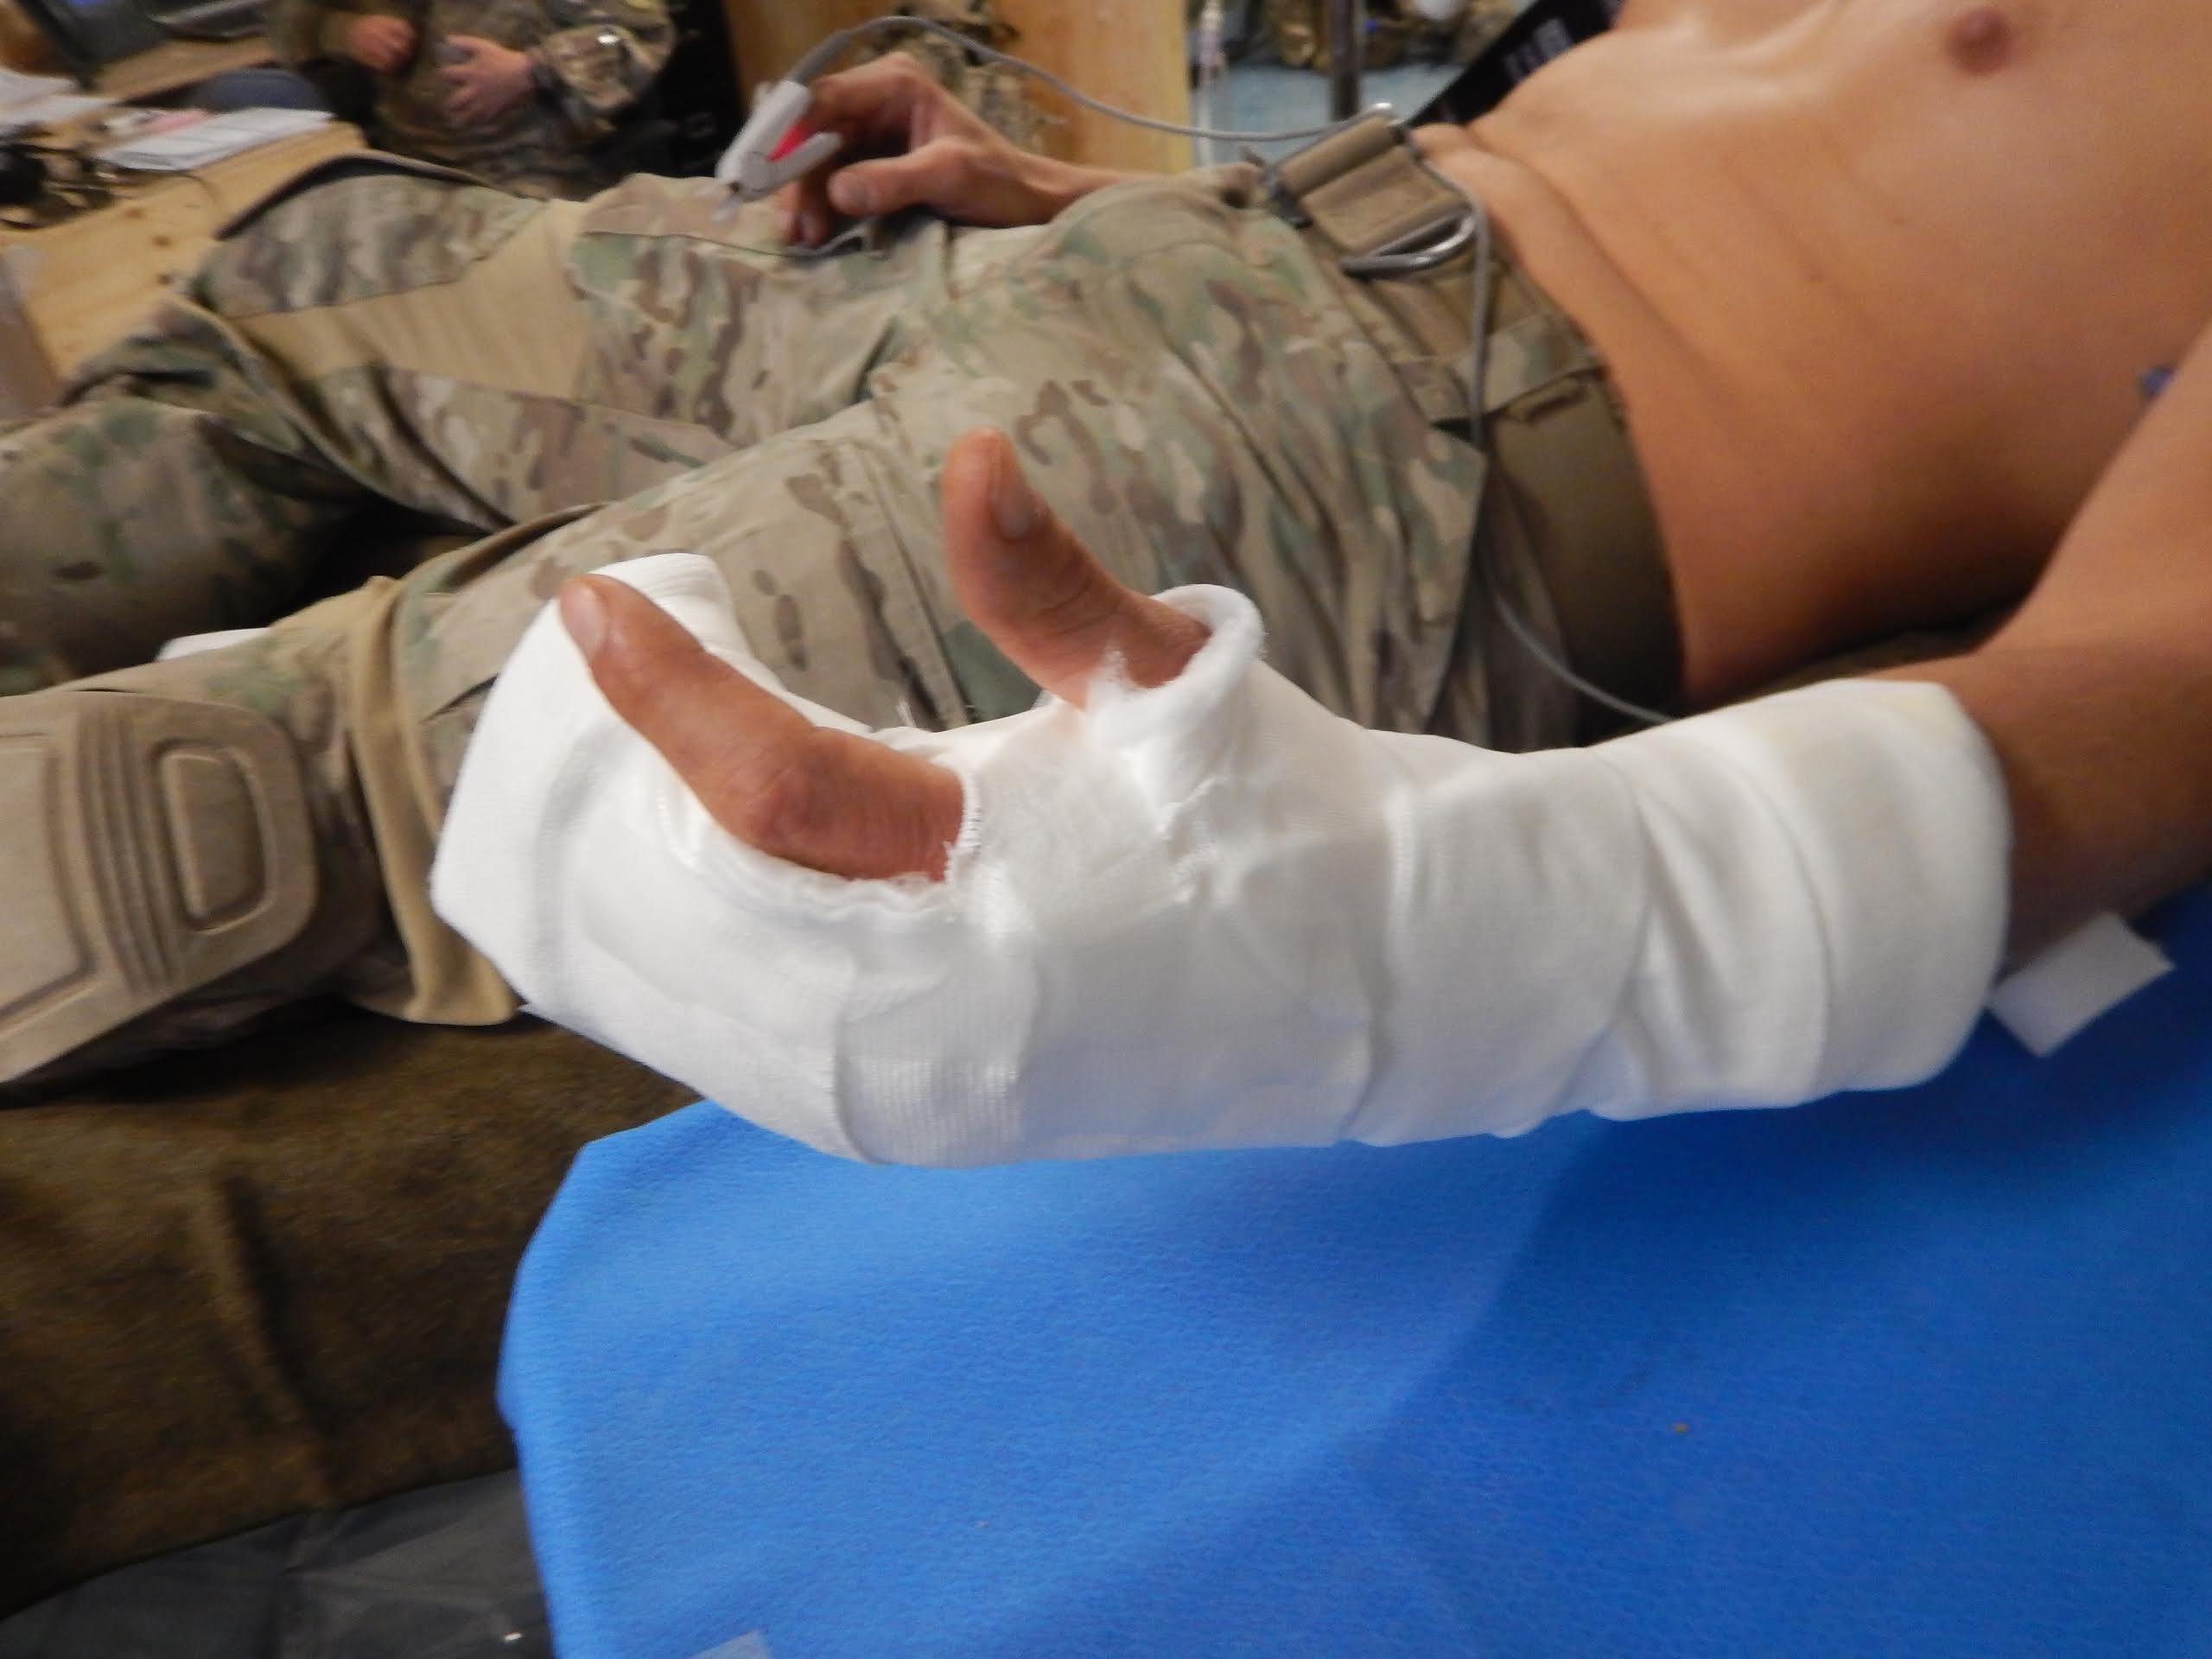 A Week Later, He Fired A Rocket Launcher With This Splint On...